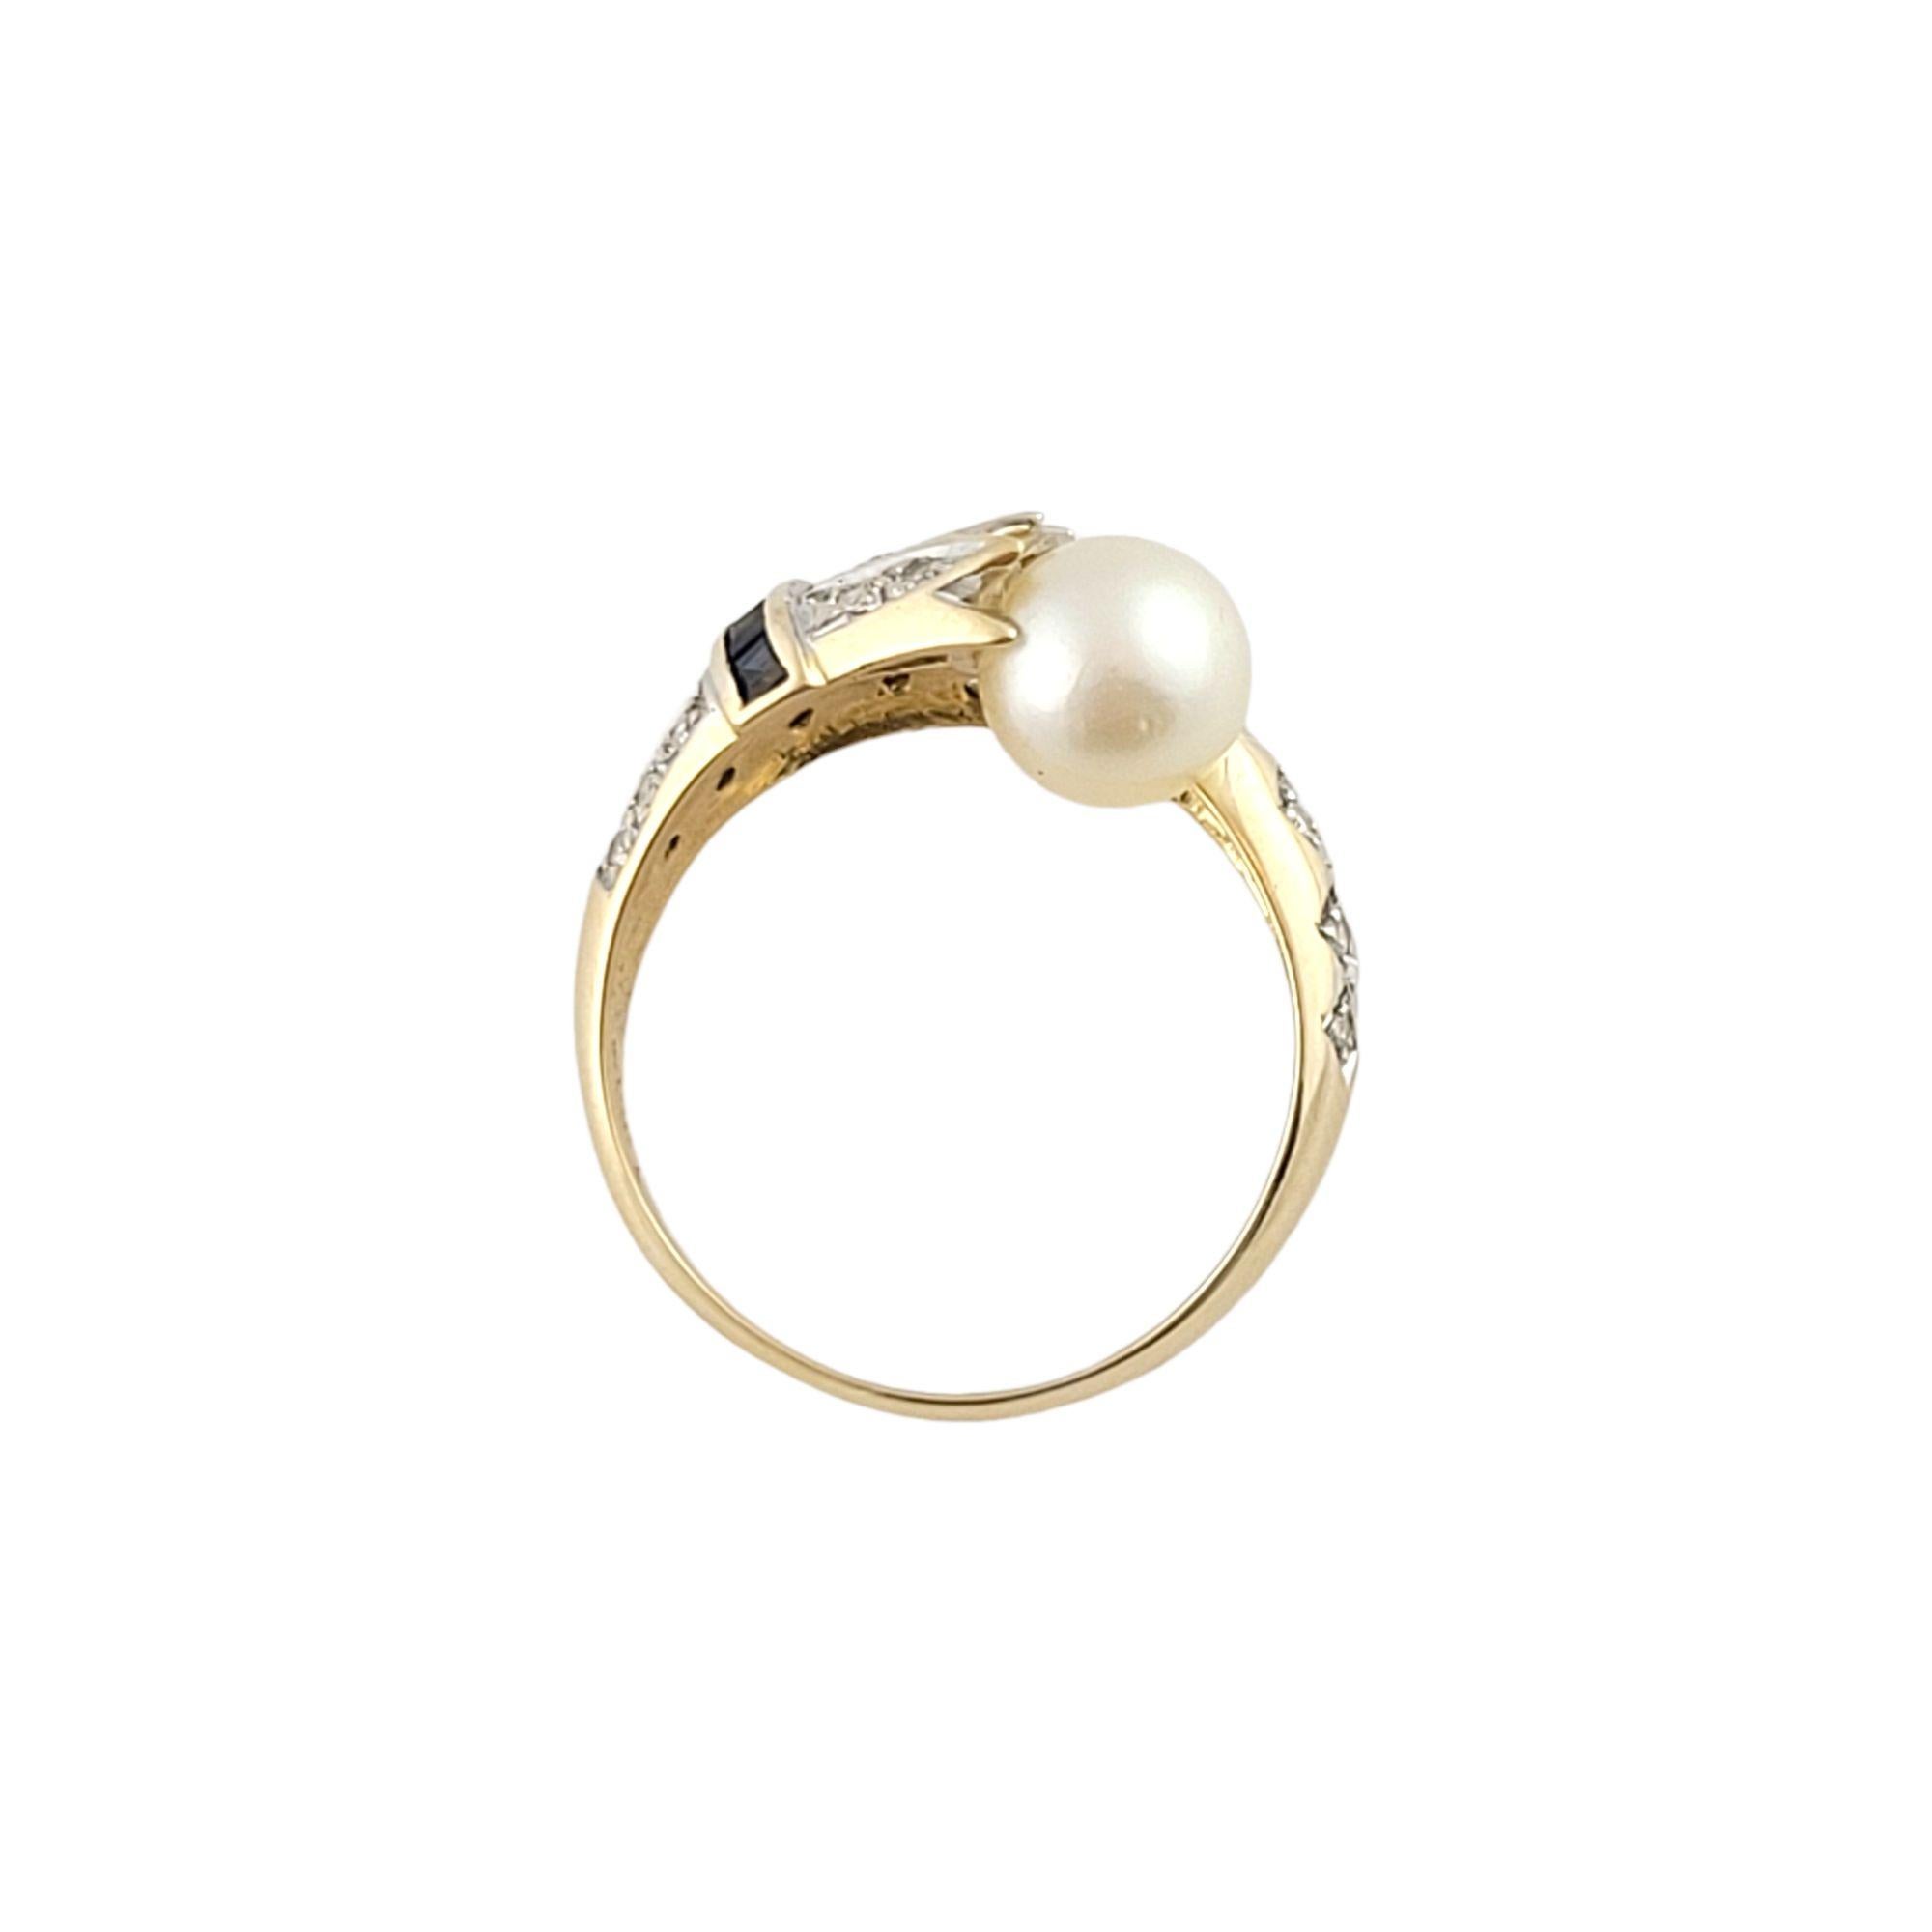 Vintage 14K Yellow Gold Pearl Ring w/ Sapphires and Diamonds Size 5.75

Gorgeous pearl set in a 14K yellow gold ring surrounded by 34 sparkling single cut diamonds and 4 beautiful blue sapphires!

Pearl size: 7mm

Approximate total diamond weight: